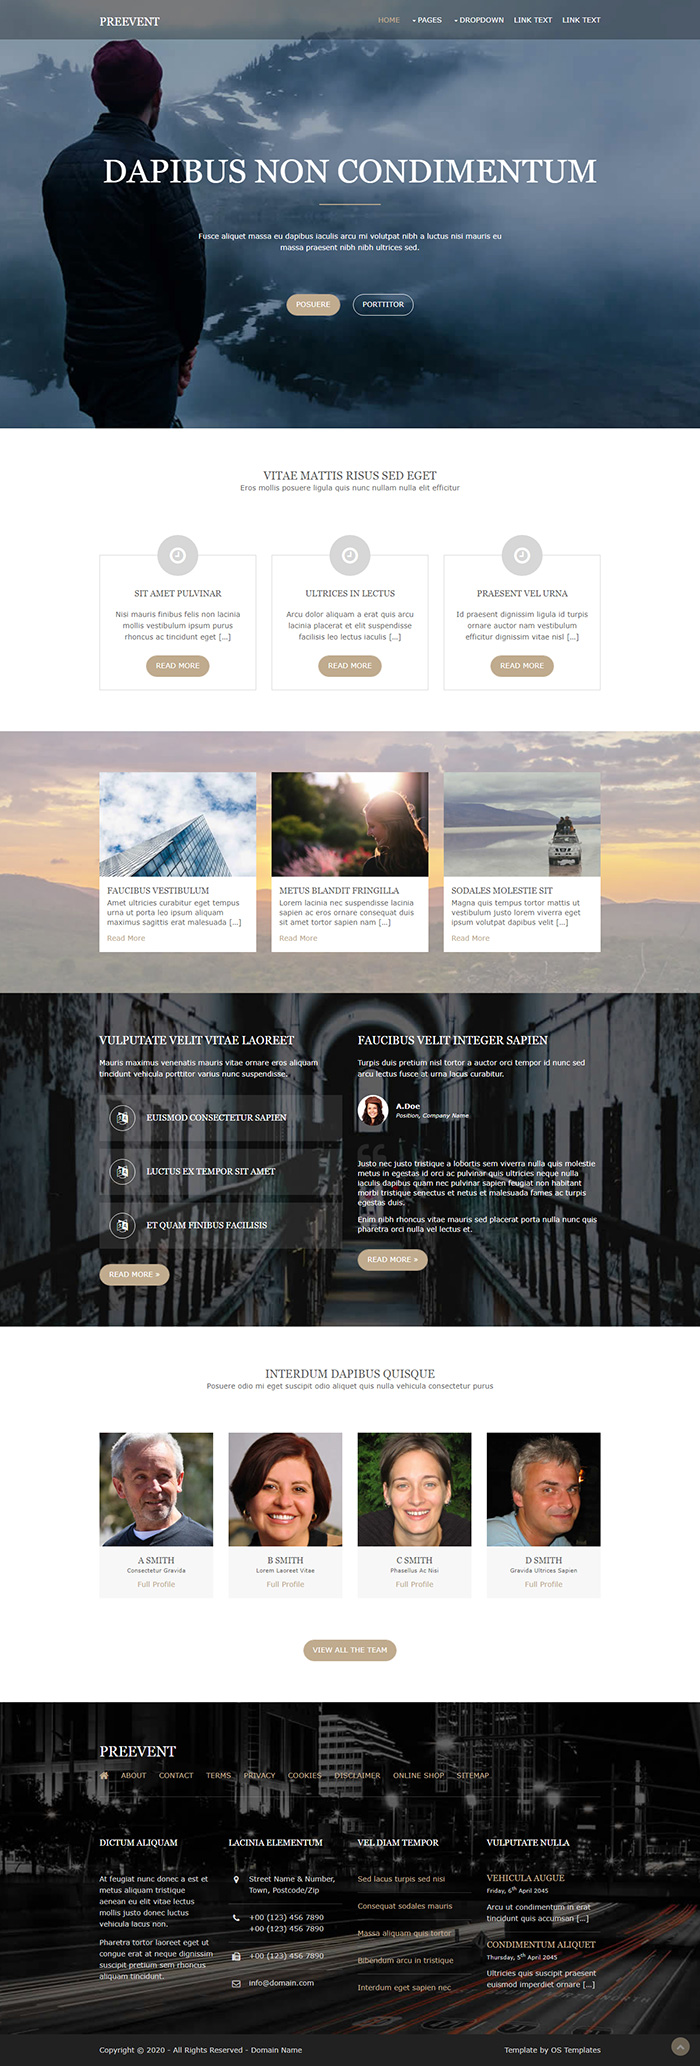 Free Preevent Website Template - Free Website Templates, HTML5 & CSS